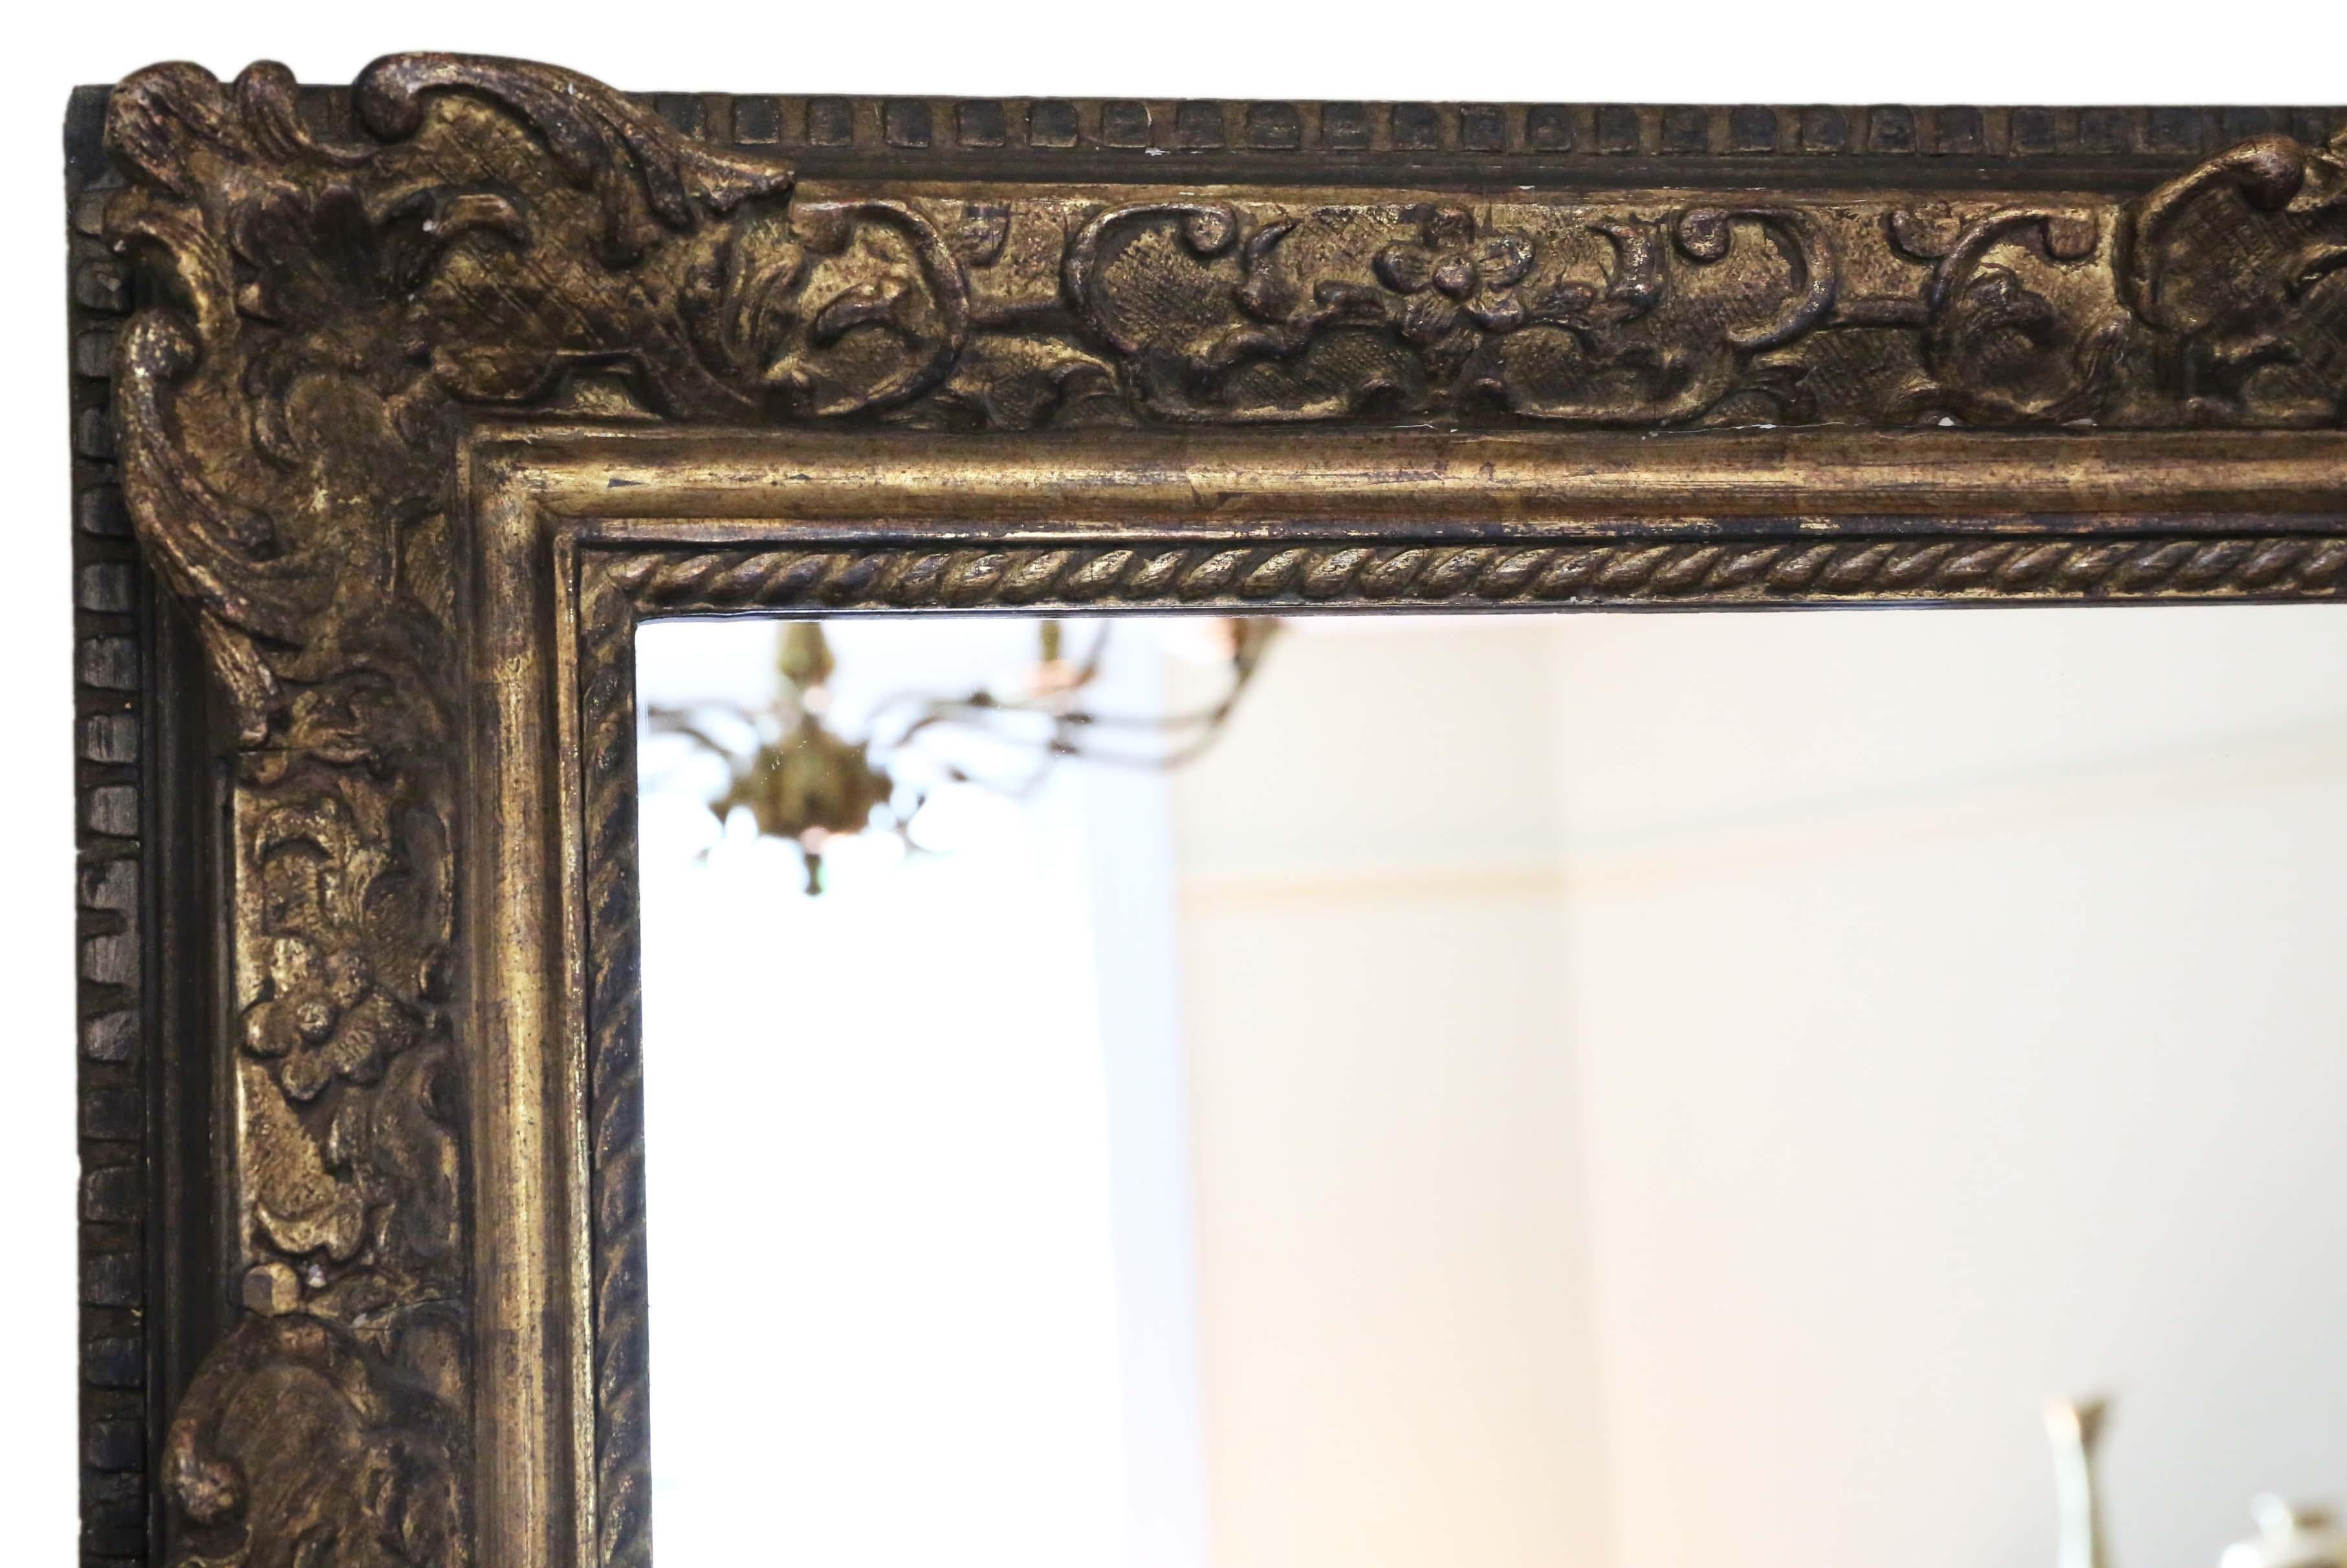 Antique large quality 19th century gilt overmantel or wall mirror. A great look.
A charming mirror, that is full of age and character. Lovely frame with some losses touching up, refinishing and repairs over the years. No loose joints and no